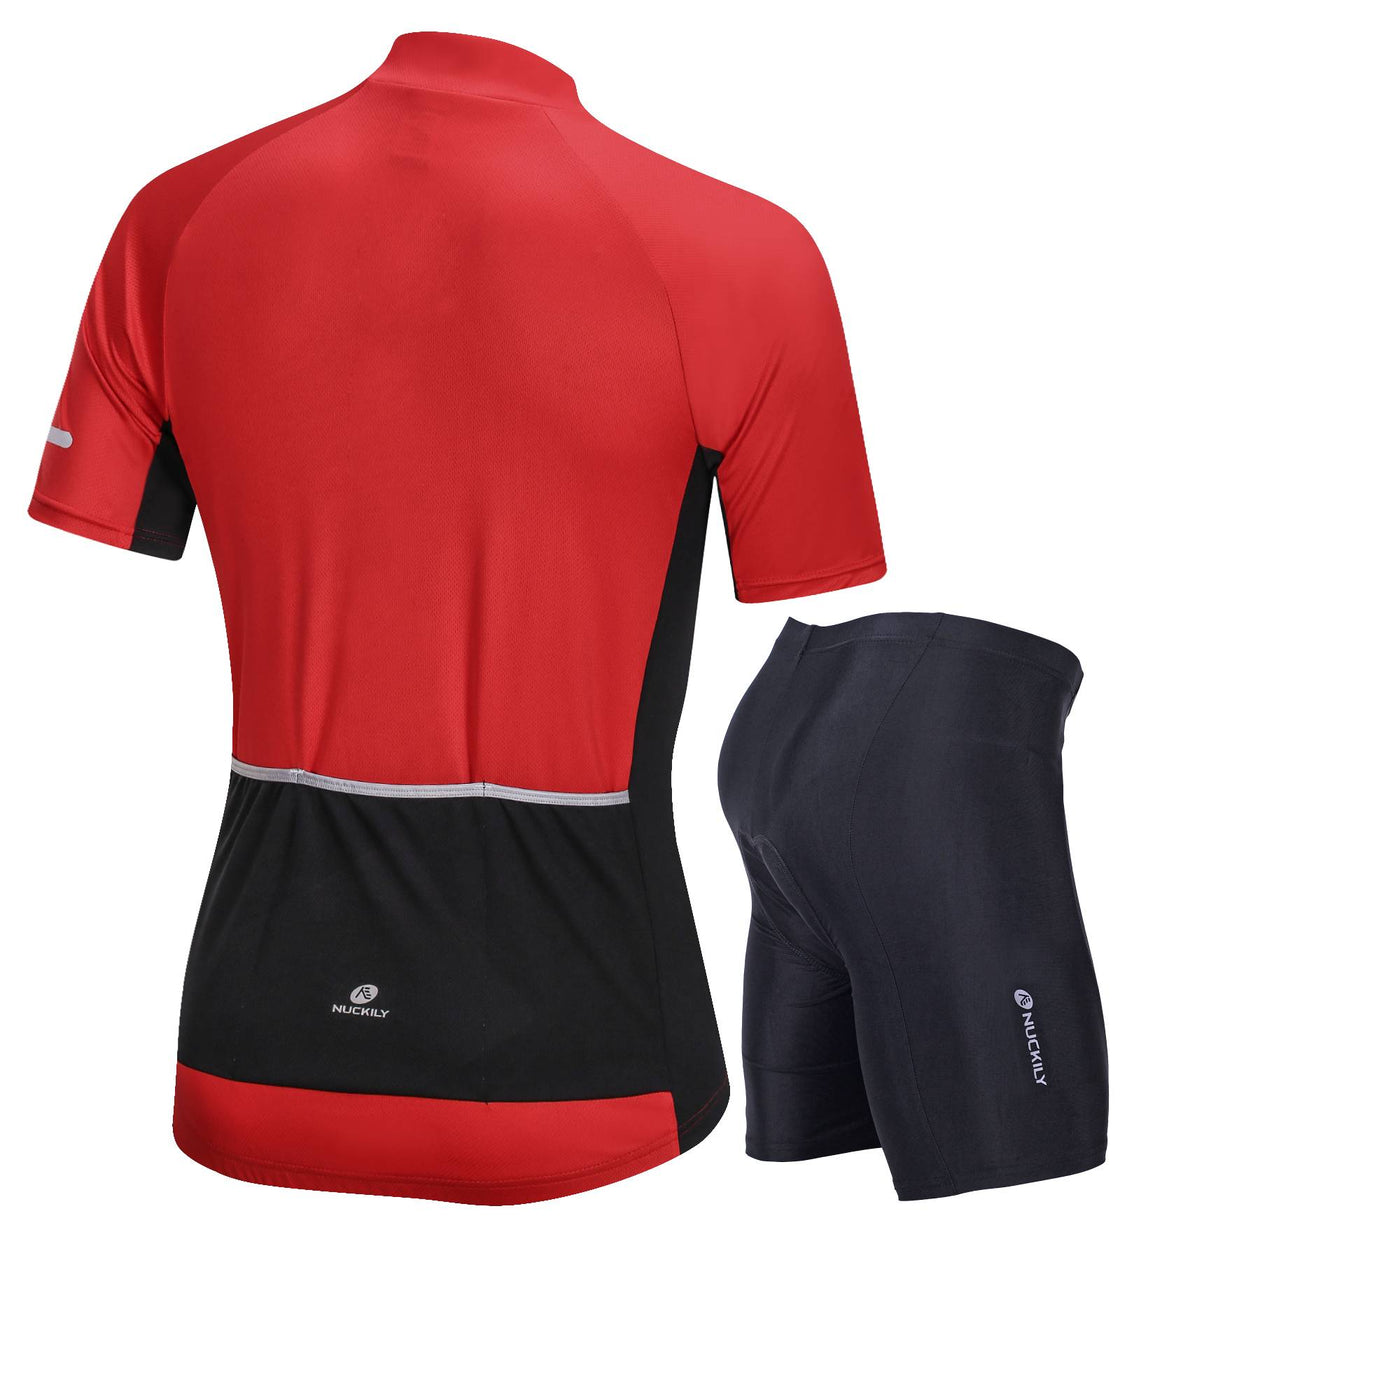 Nuckily MG043-NS355 Jersey And Shorts Set (Red)